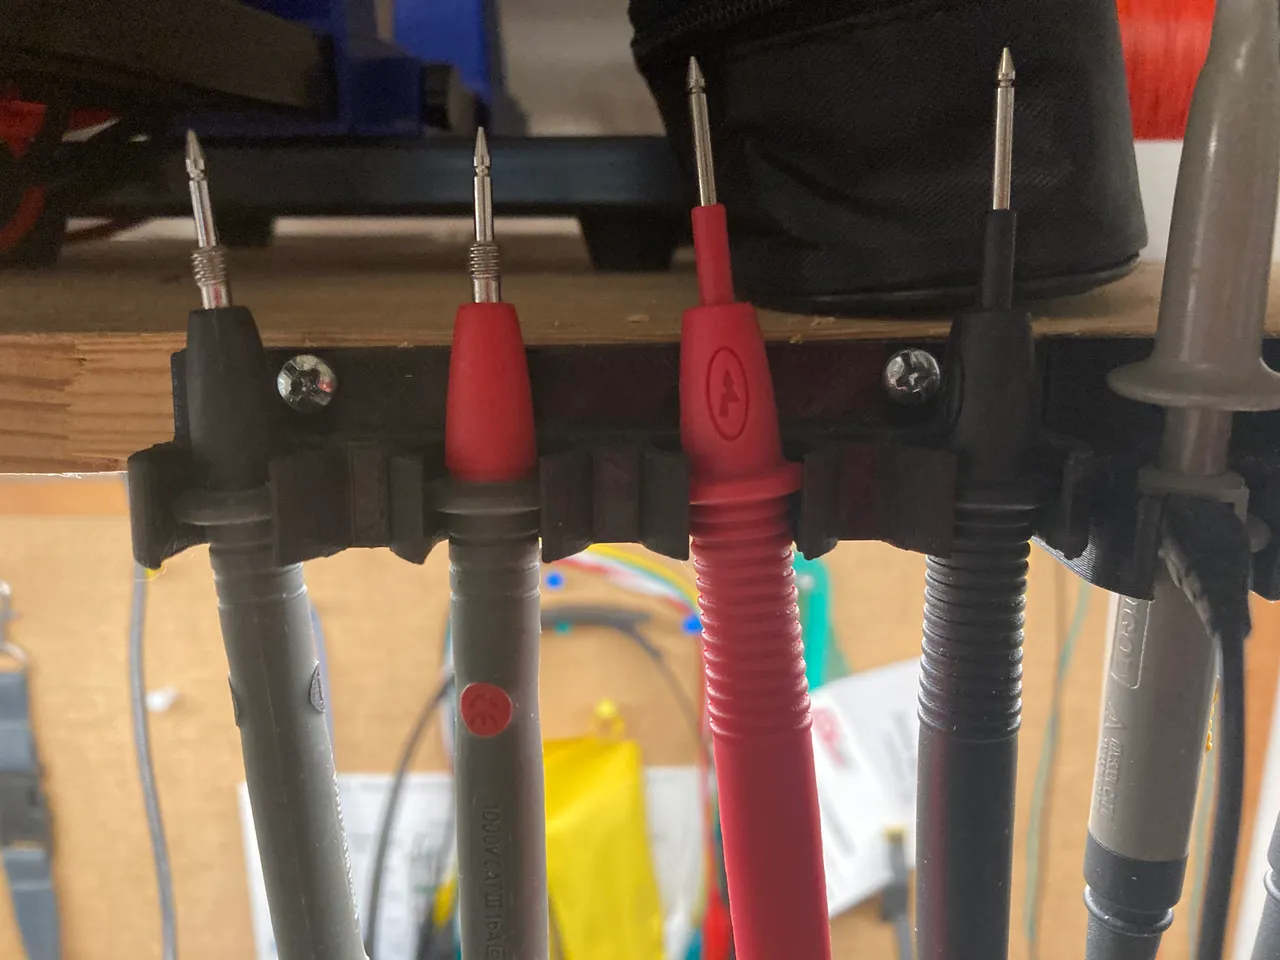 3D printed Probe holder. The best I have seen.